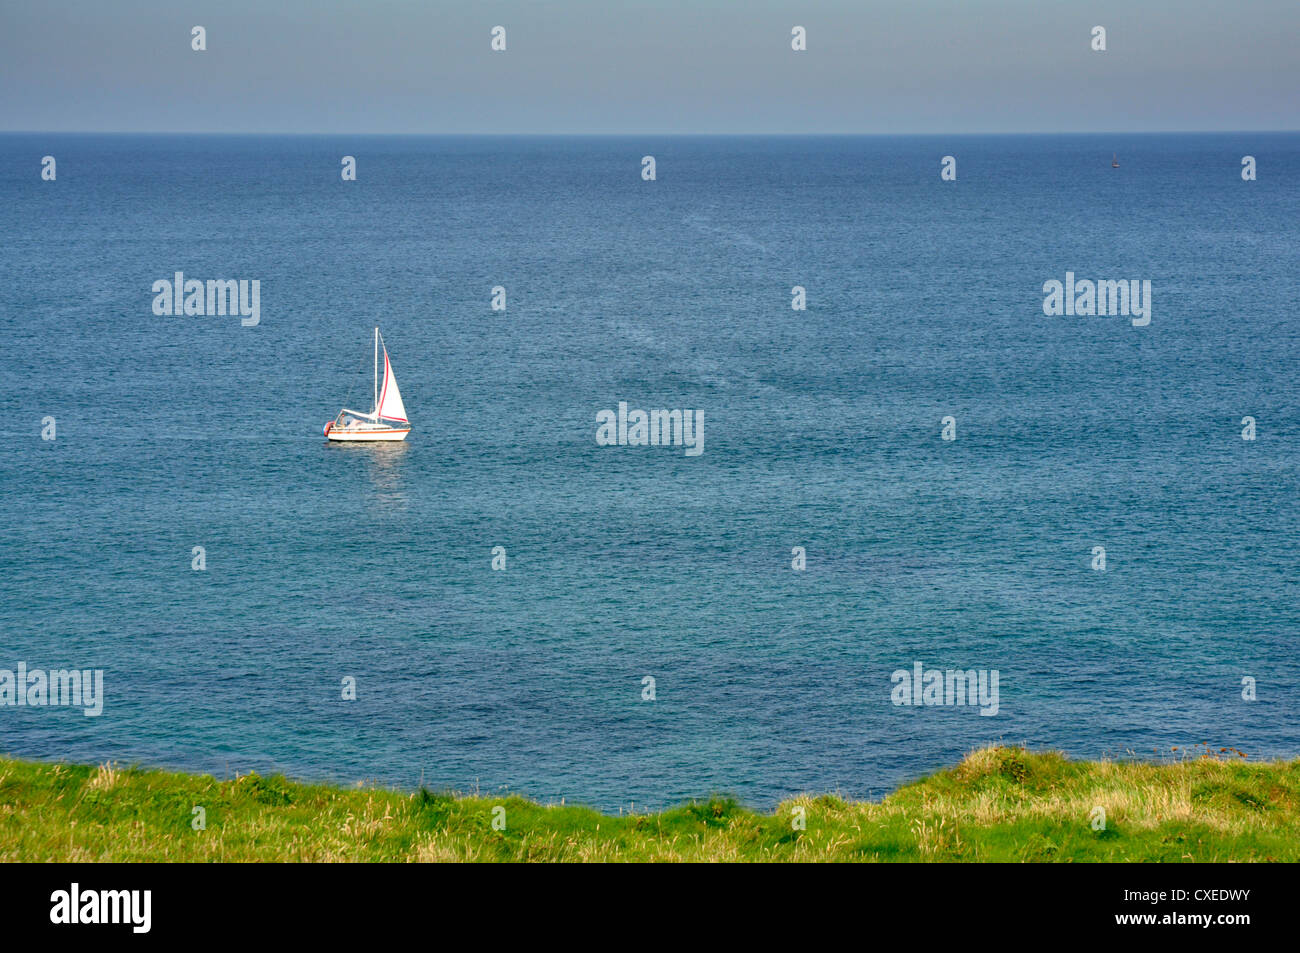 Azure sea - white sail on a small boat - green cliff top - sailing - alone on a empty seascape - a summer day Stock Photo